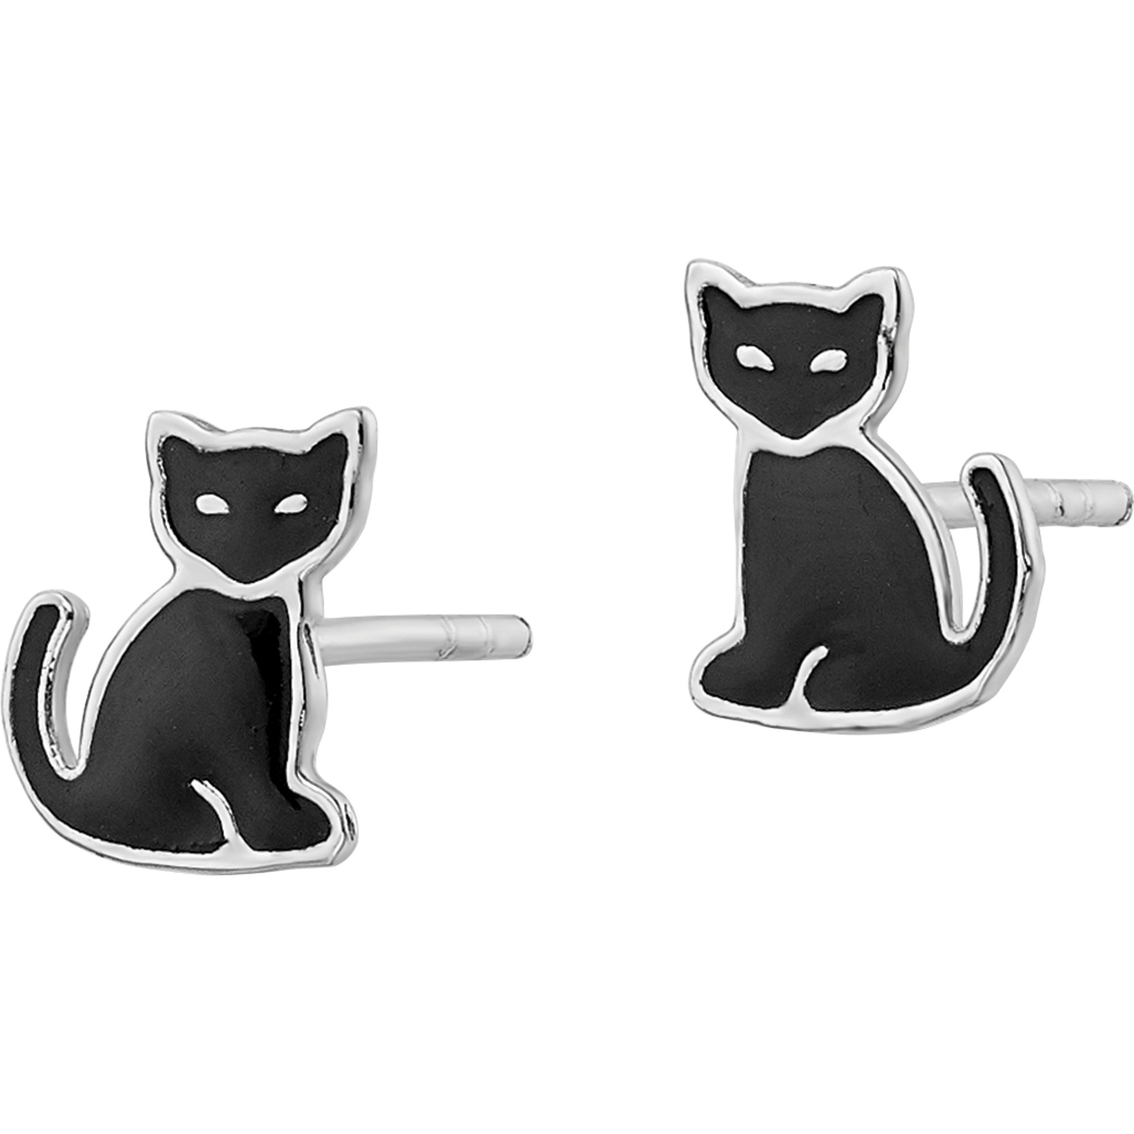 Sterling Silver and Rhodium Plated Enameled Black Cat Post Earrings - Image 2 of 2